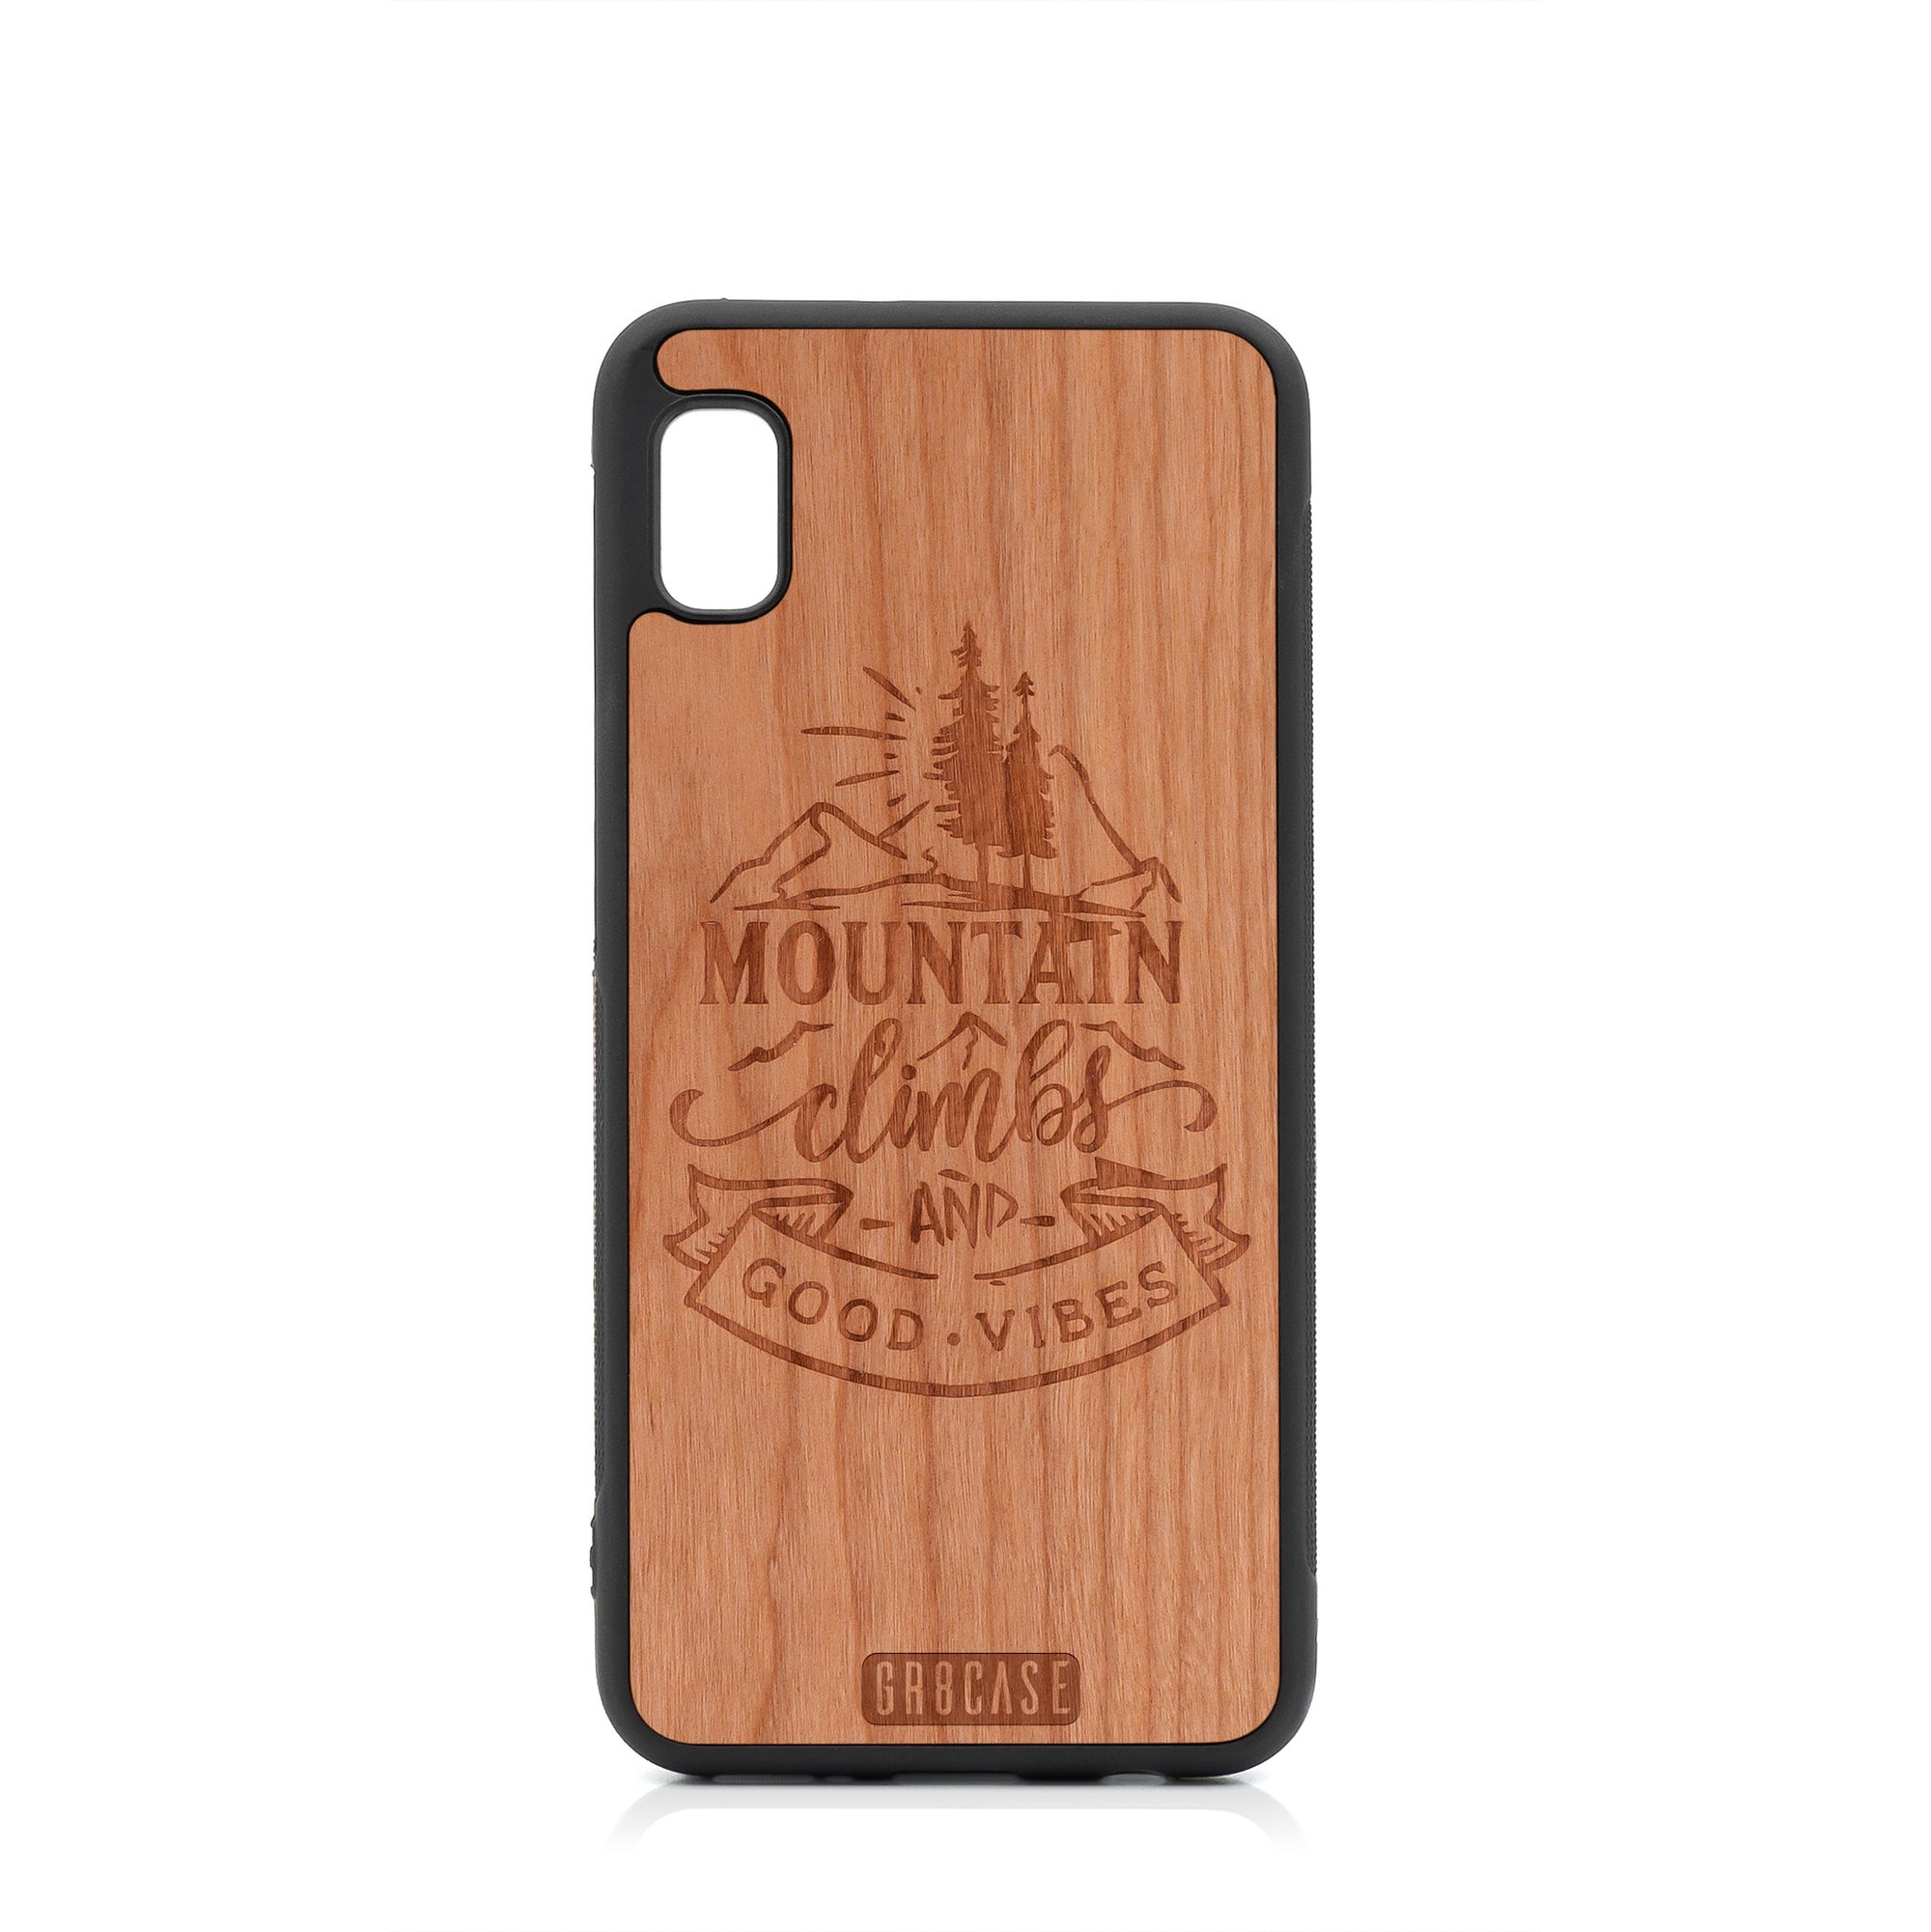 Mountain Climbs And Good Vibes Design Wood Case For Samsung Galaxy A10E by GR8CASE